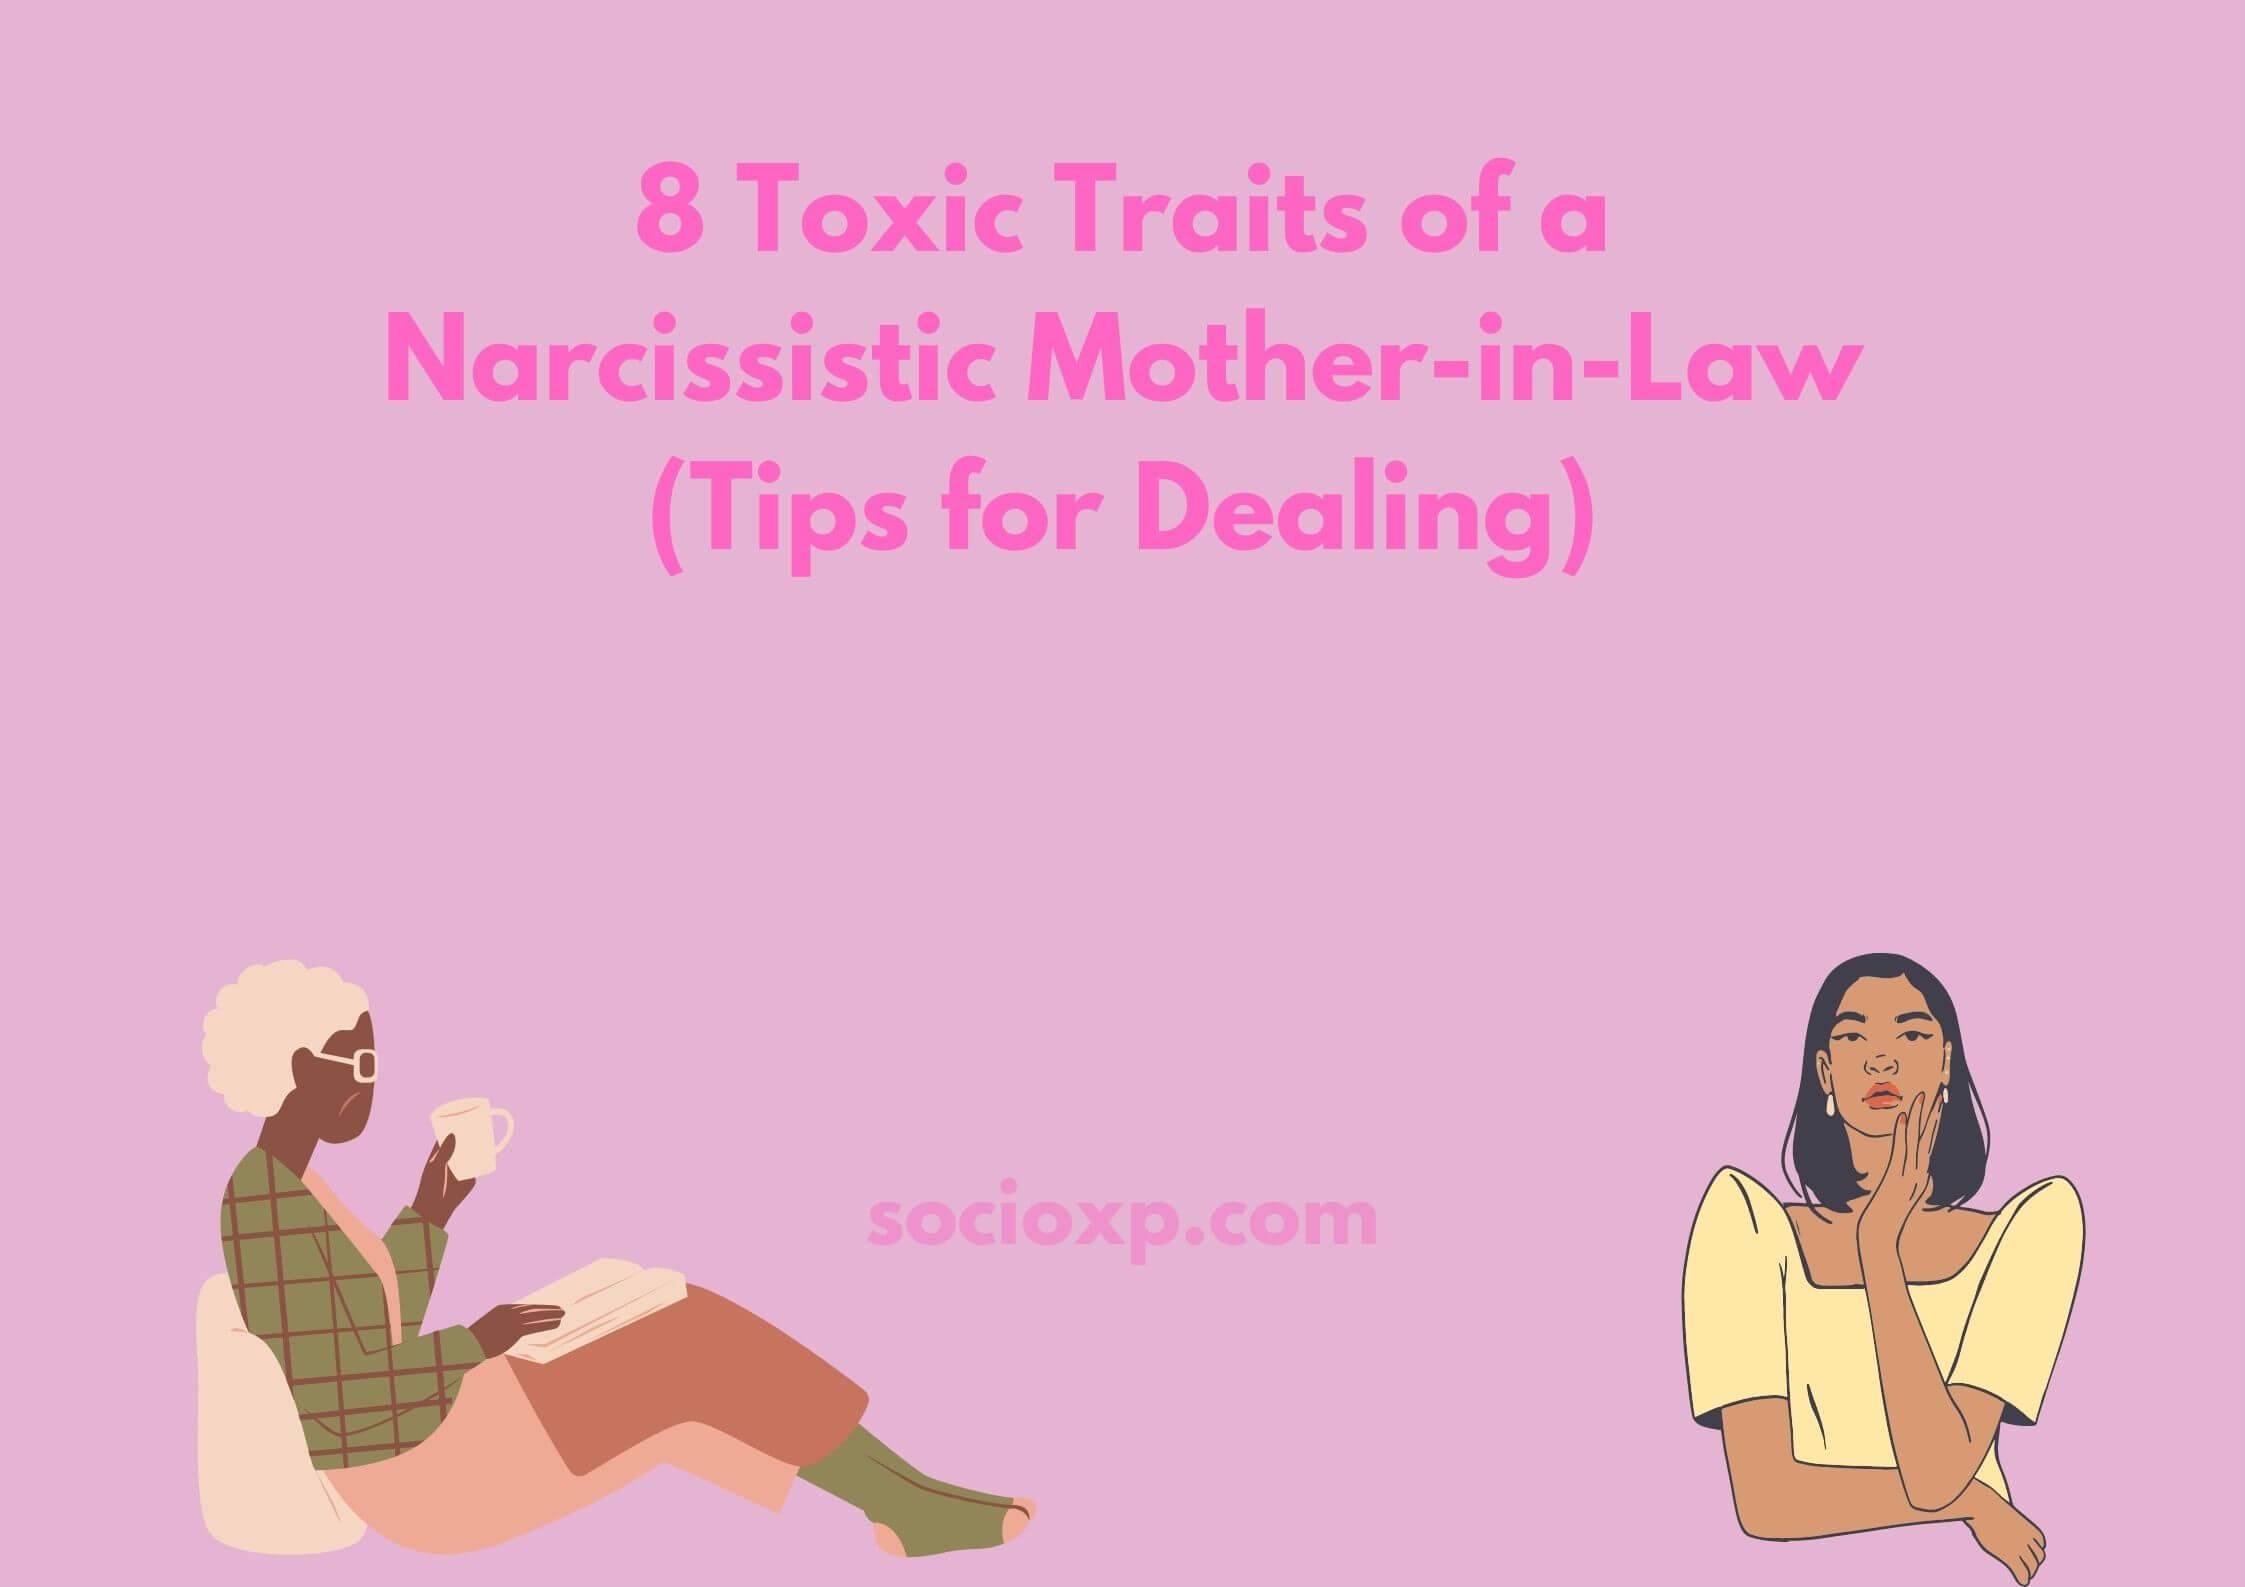 8 Toxic Traits of a Narcissistic Mother-in-Law (Tips for Dealing)